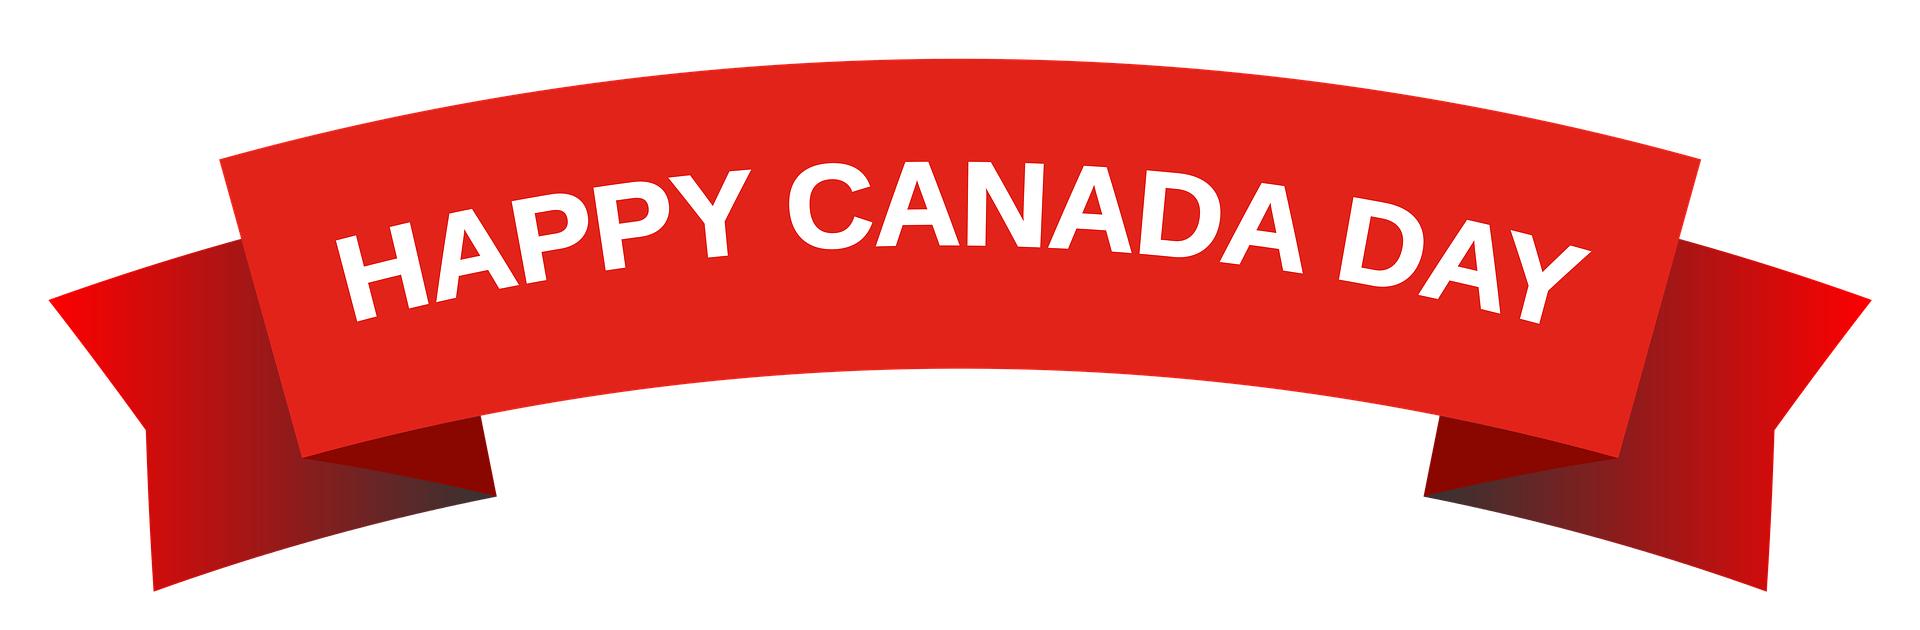 Happy Canada Day Wishes, Greetings Messages – July 1st Celebrate Canada Day